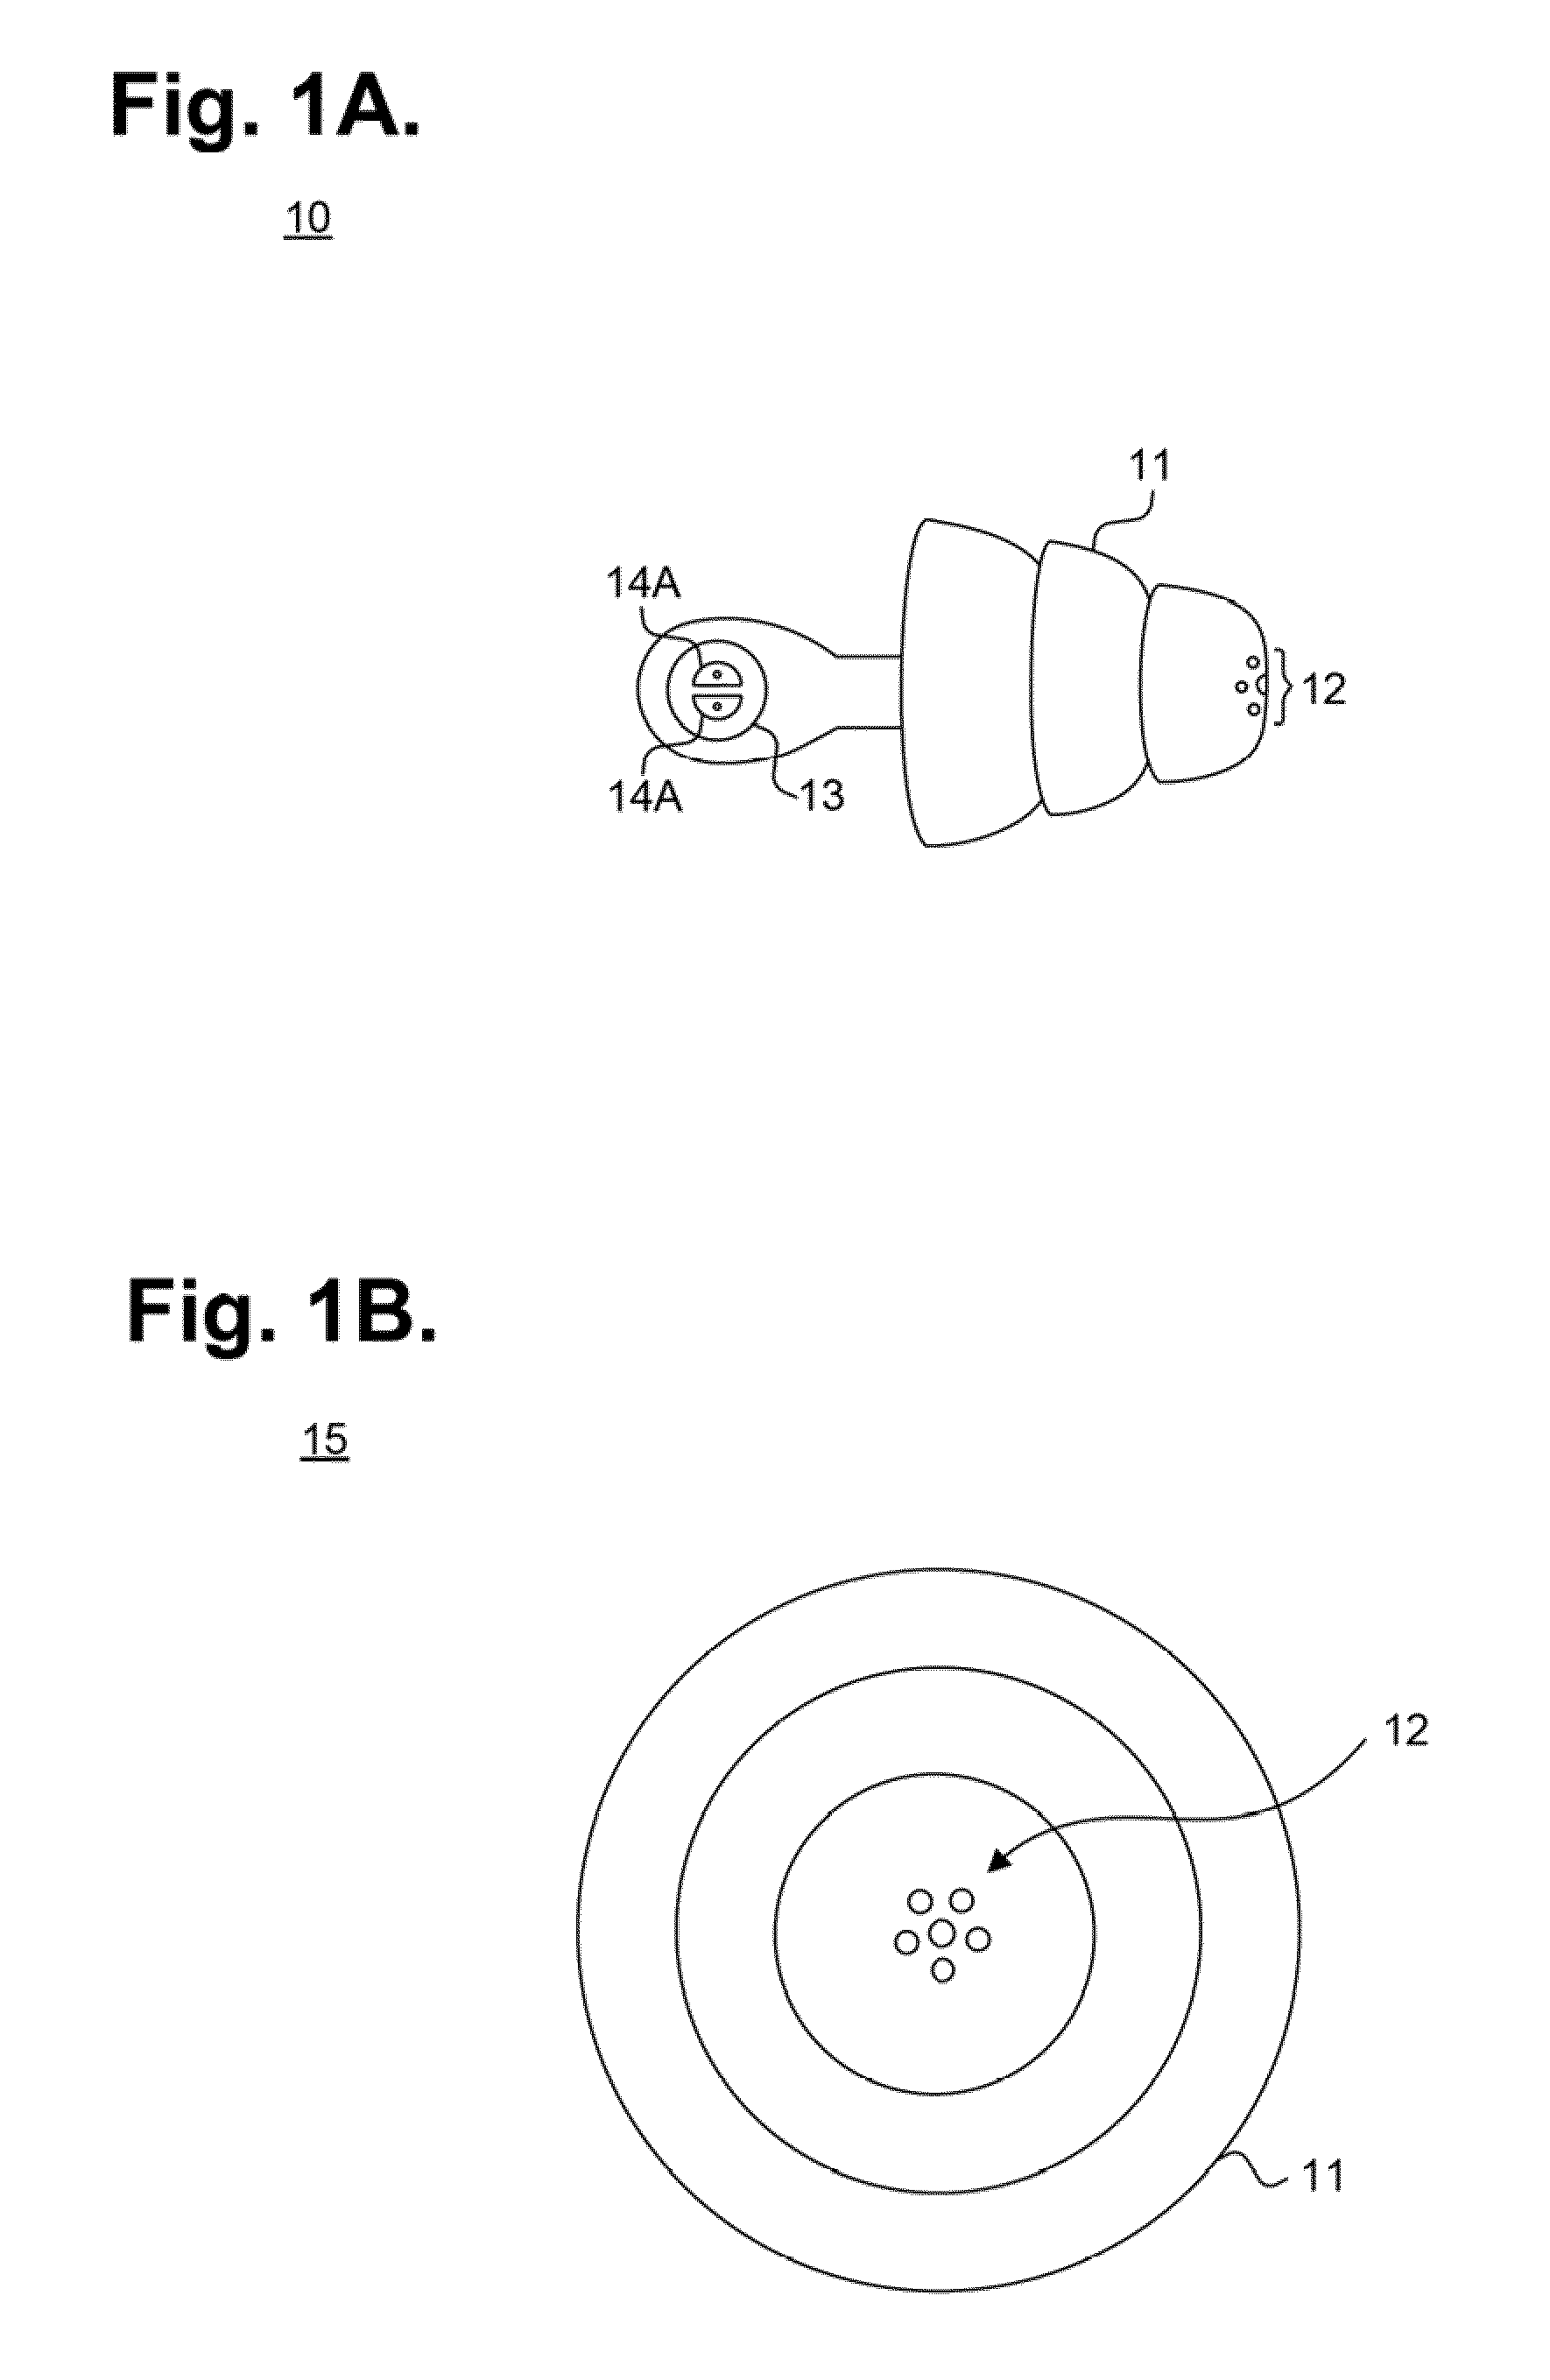 Wearable wireless ear plug for providing a downloadable programmable personal alarm and method of construction